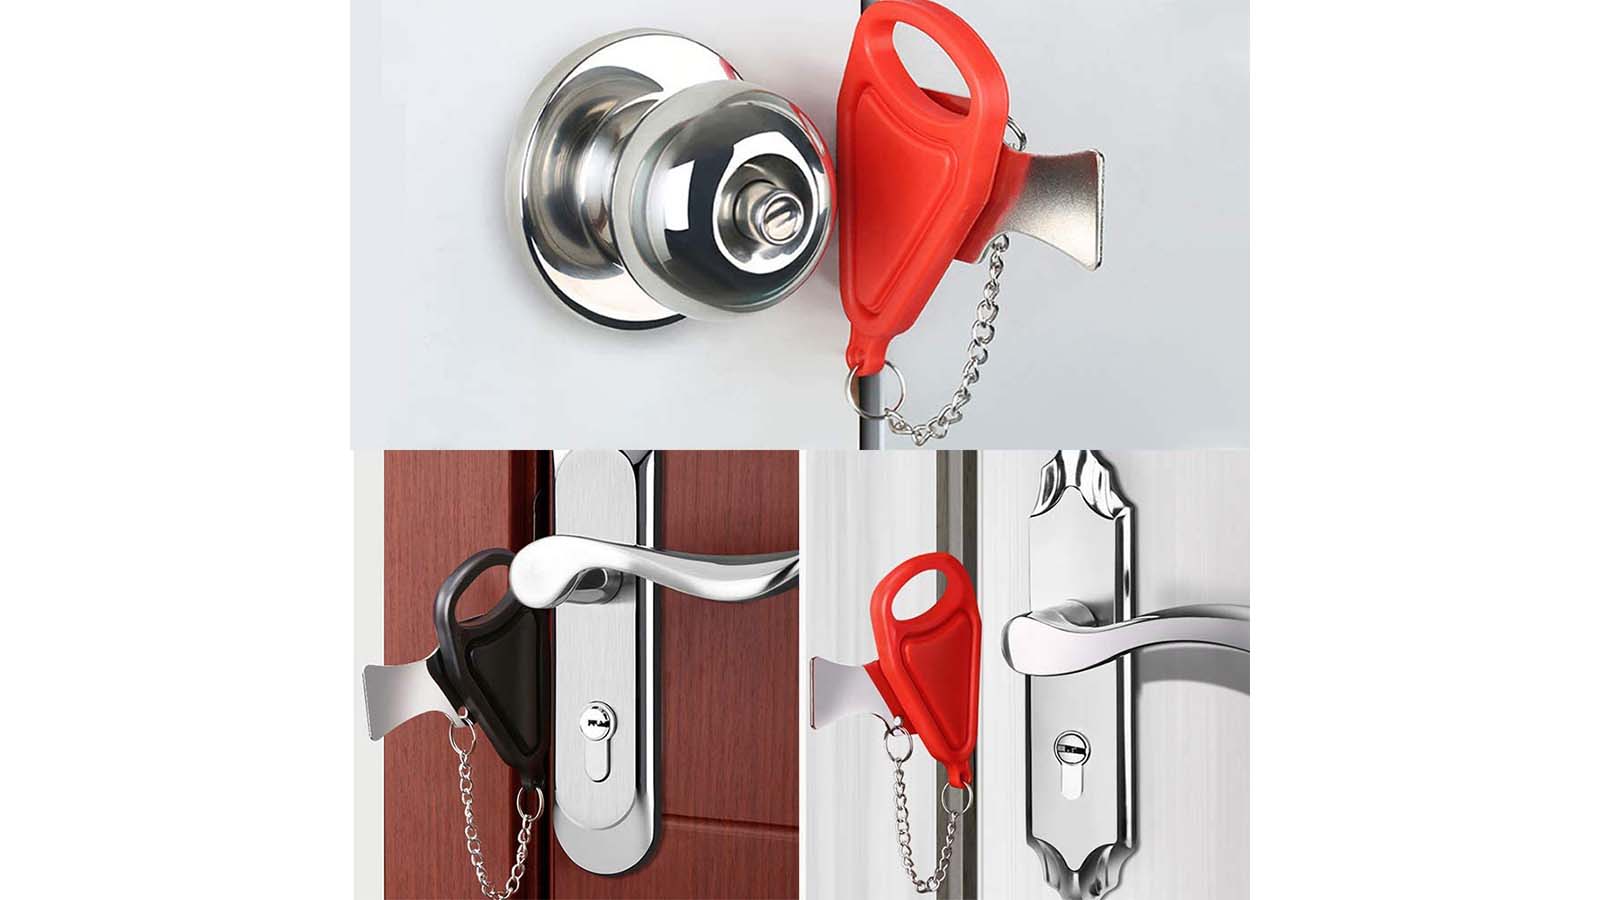 Original Trustella Heavy-Duty Portable Door Lock - Premium Stainless Steel  for Enhanced Safety - Ideal for Travel, Home, Hotels, Apartments 